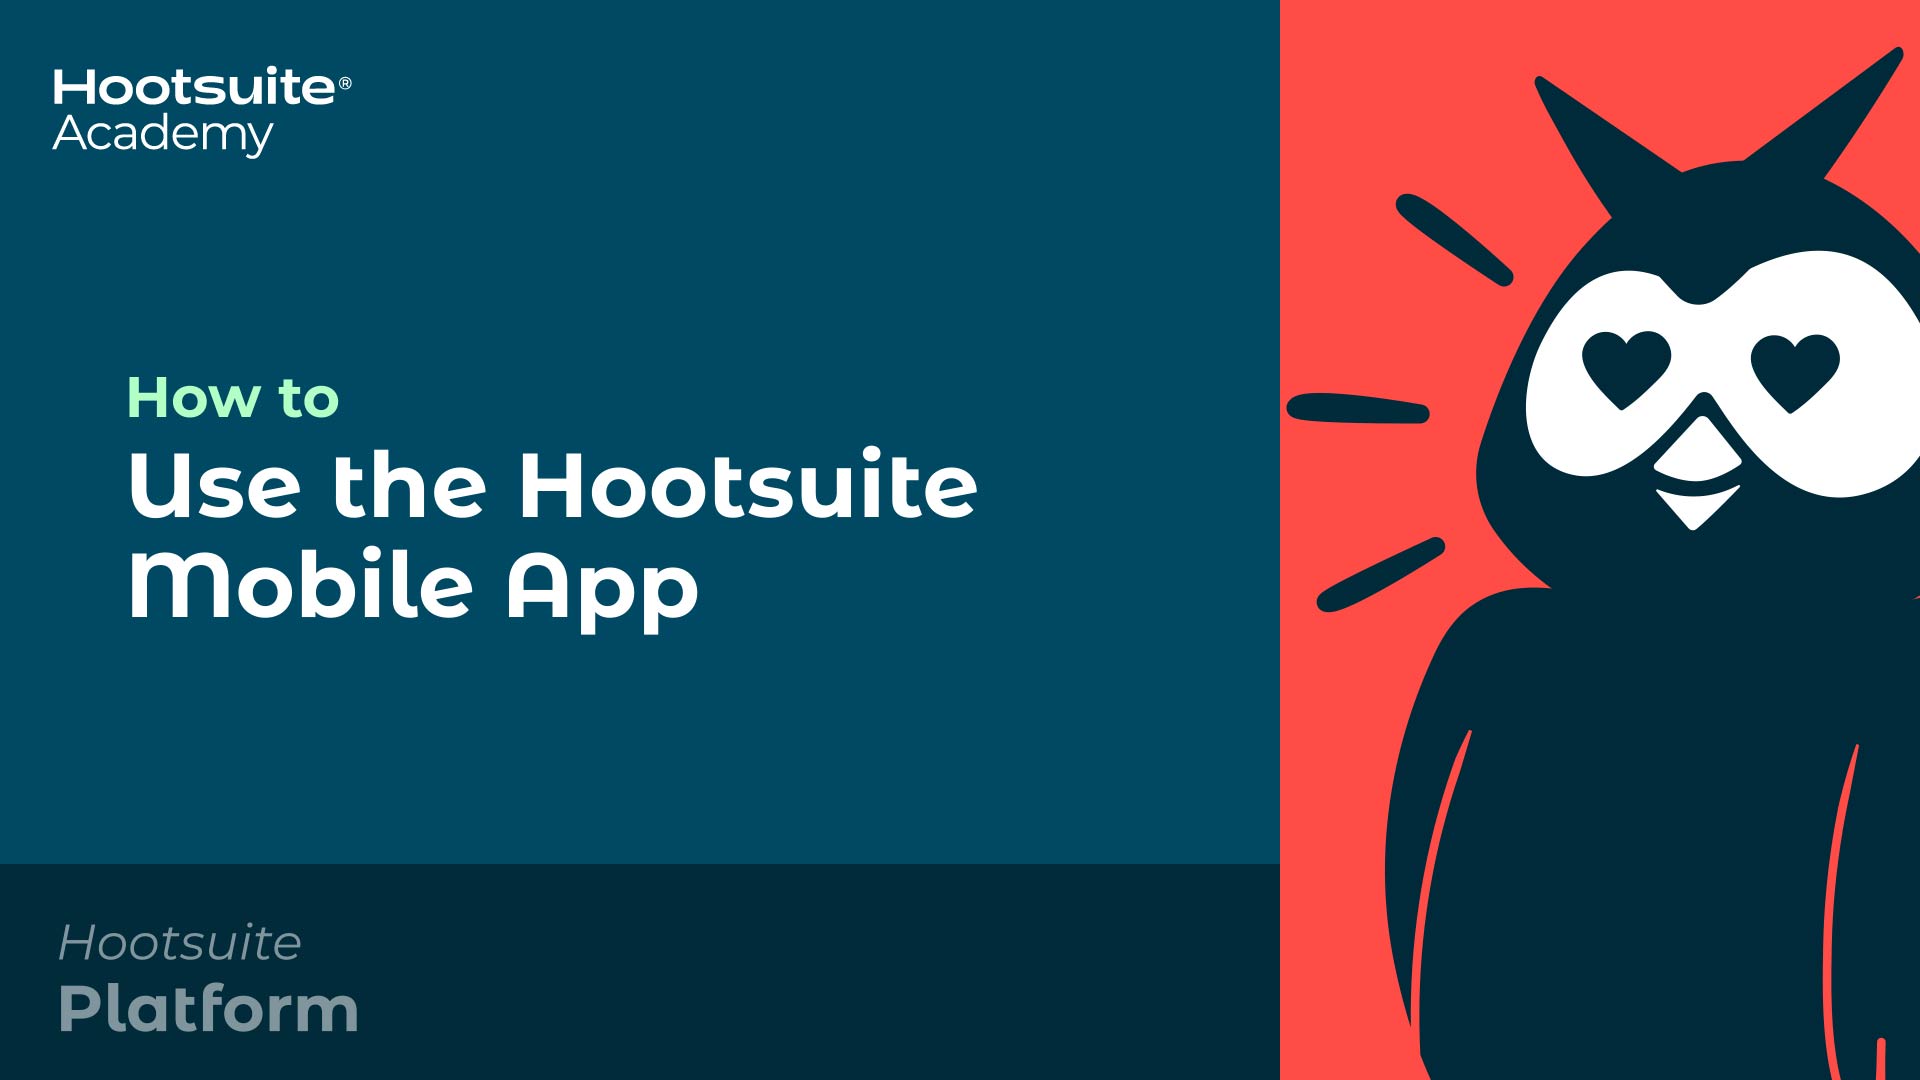 How to use the Hootsuite mobile app video.